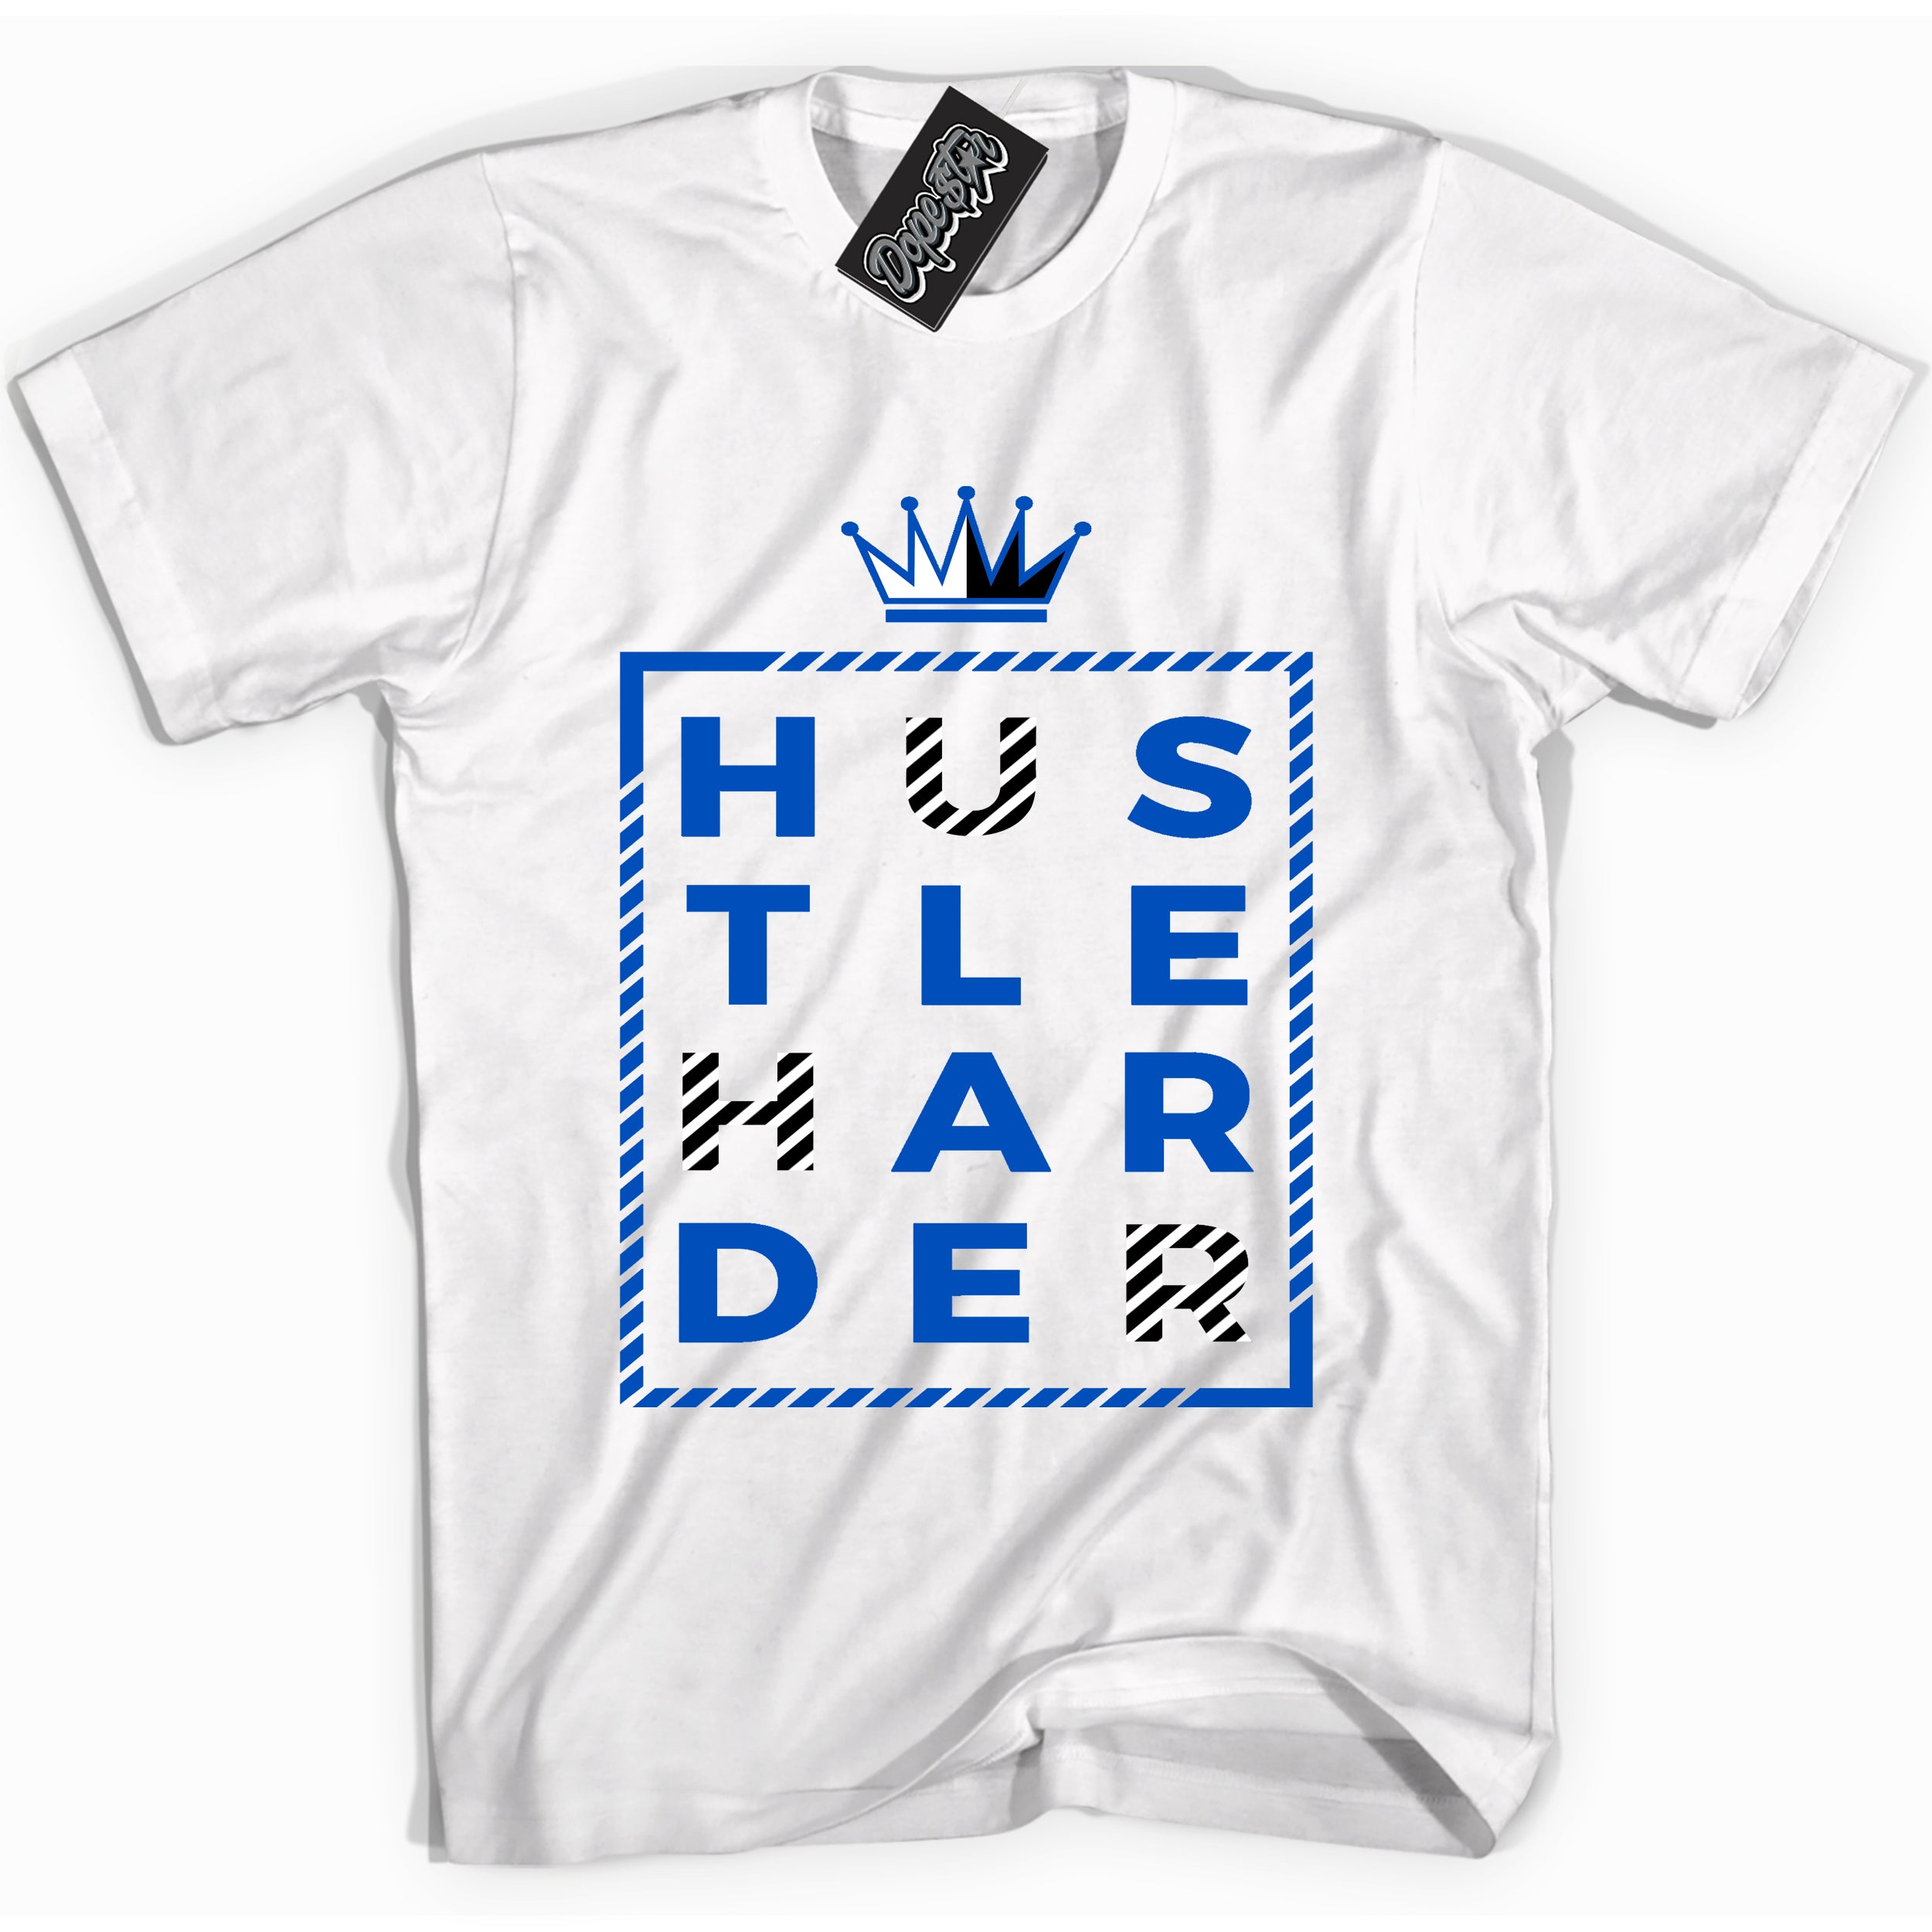 Cool White graphic tee with "Hustle Harder" design, that perfectly matches Royal Reimagined 1s sneakers 